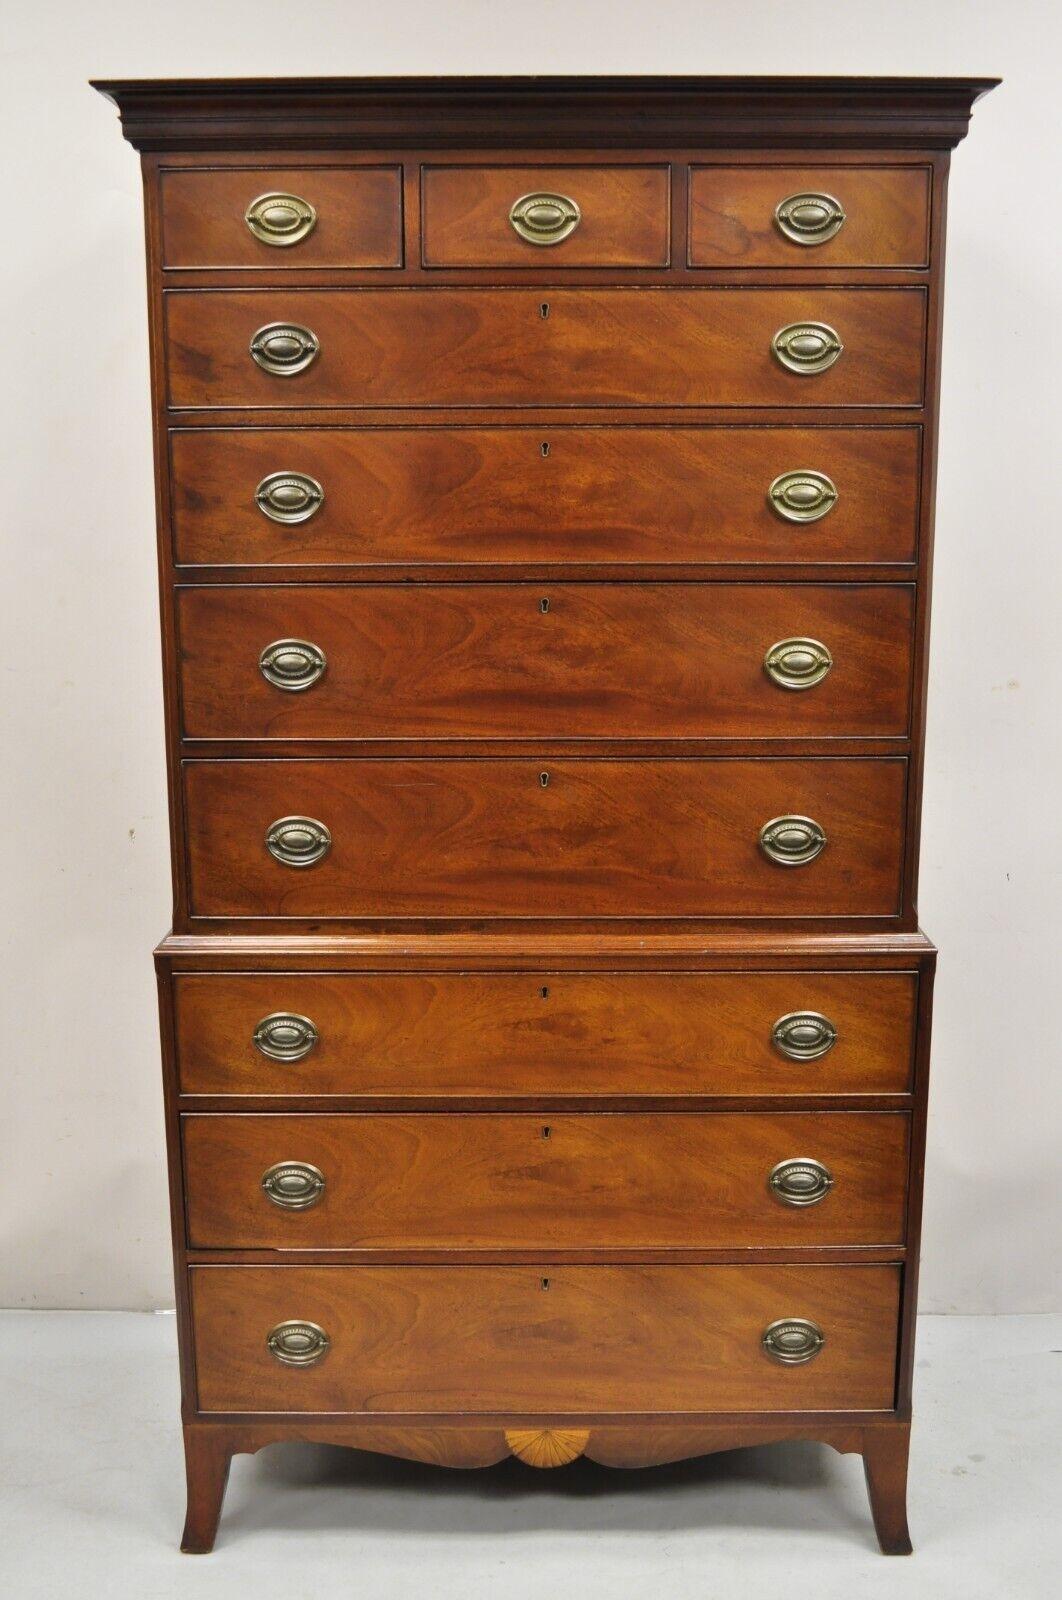 Beacon Hill Mahogany Federal Style 10 Drawer Highboy Chest on Chest Dresser. Item features 2 part construction, 10 drawers. pencil and pinwheel inlay, working locking key, original label, quality American craftsmanship. Circa Early 20th Century.